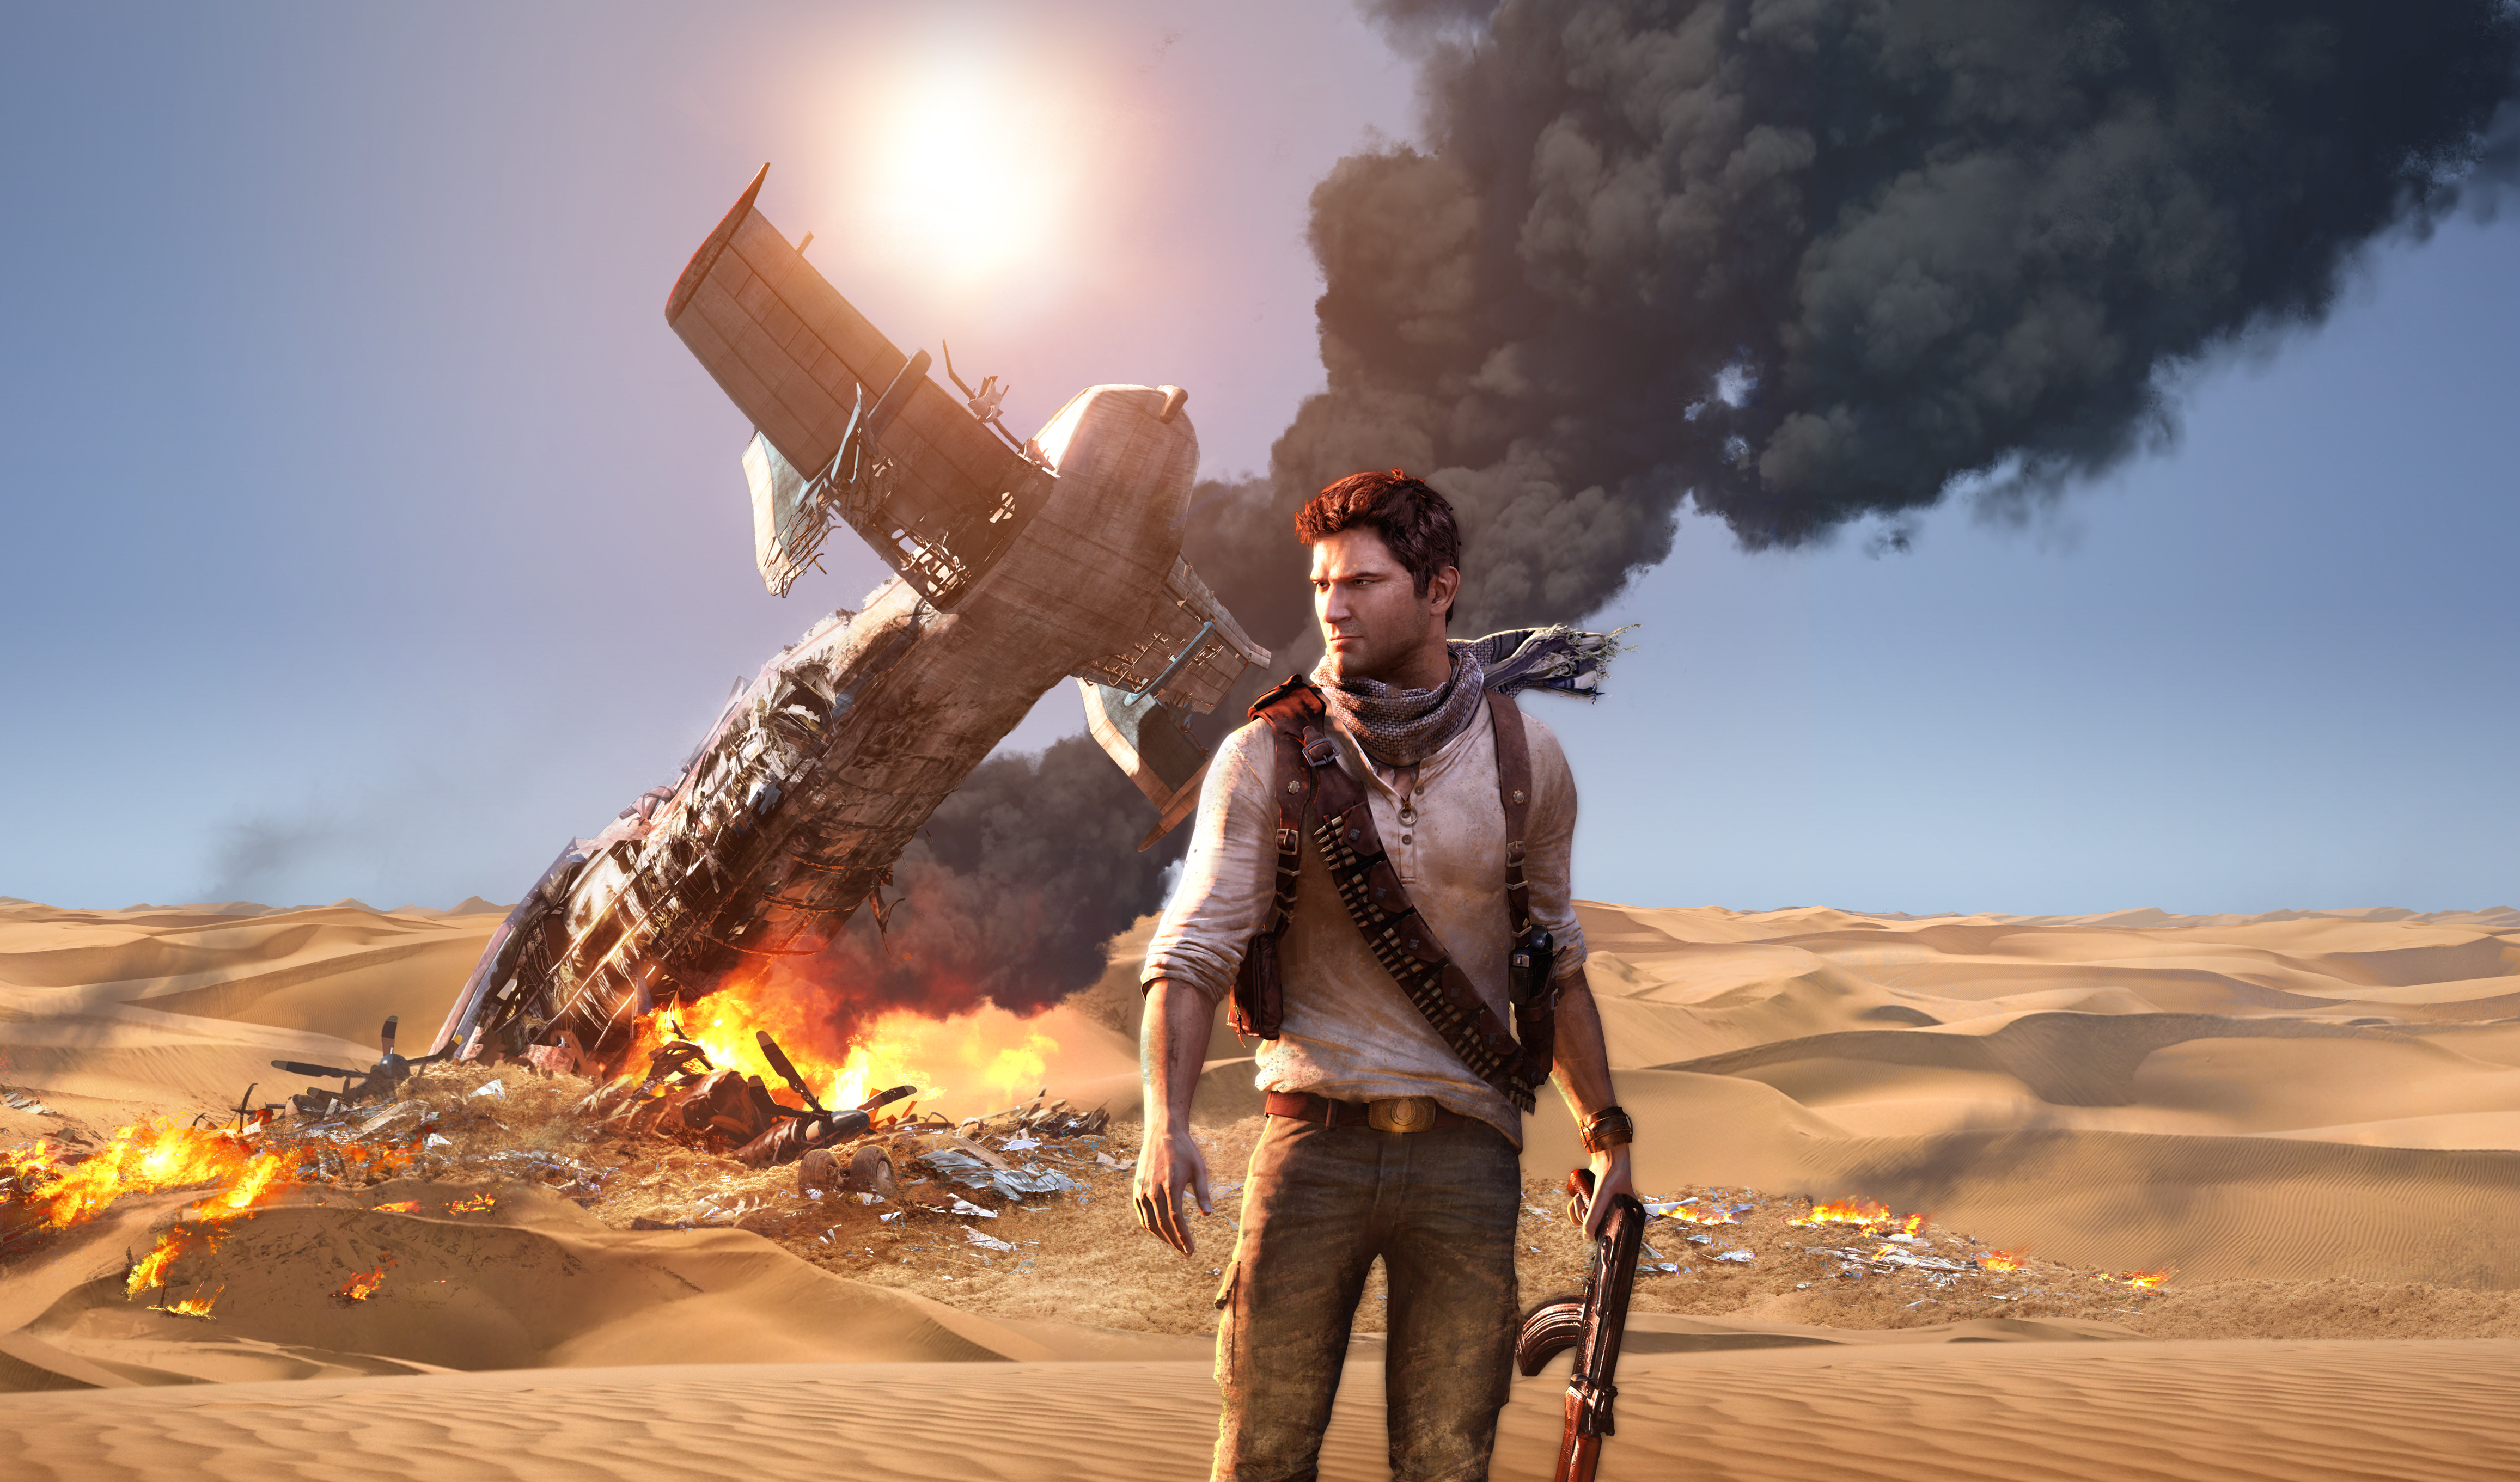 Uncharted & The Last of Us PS3 Servers Go Dark In September